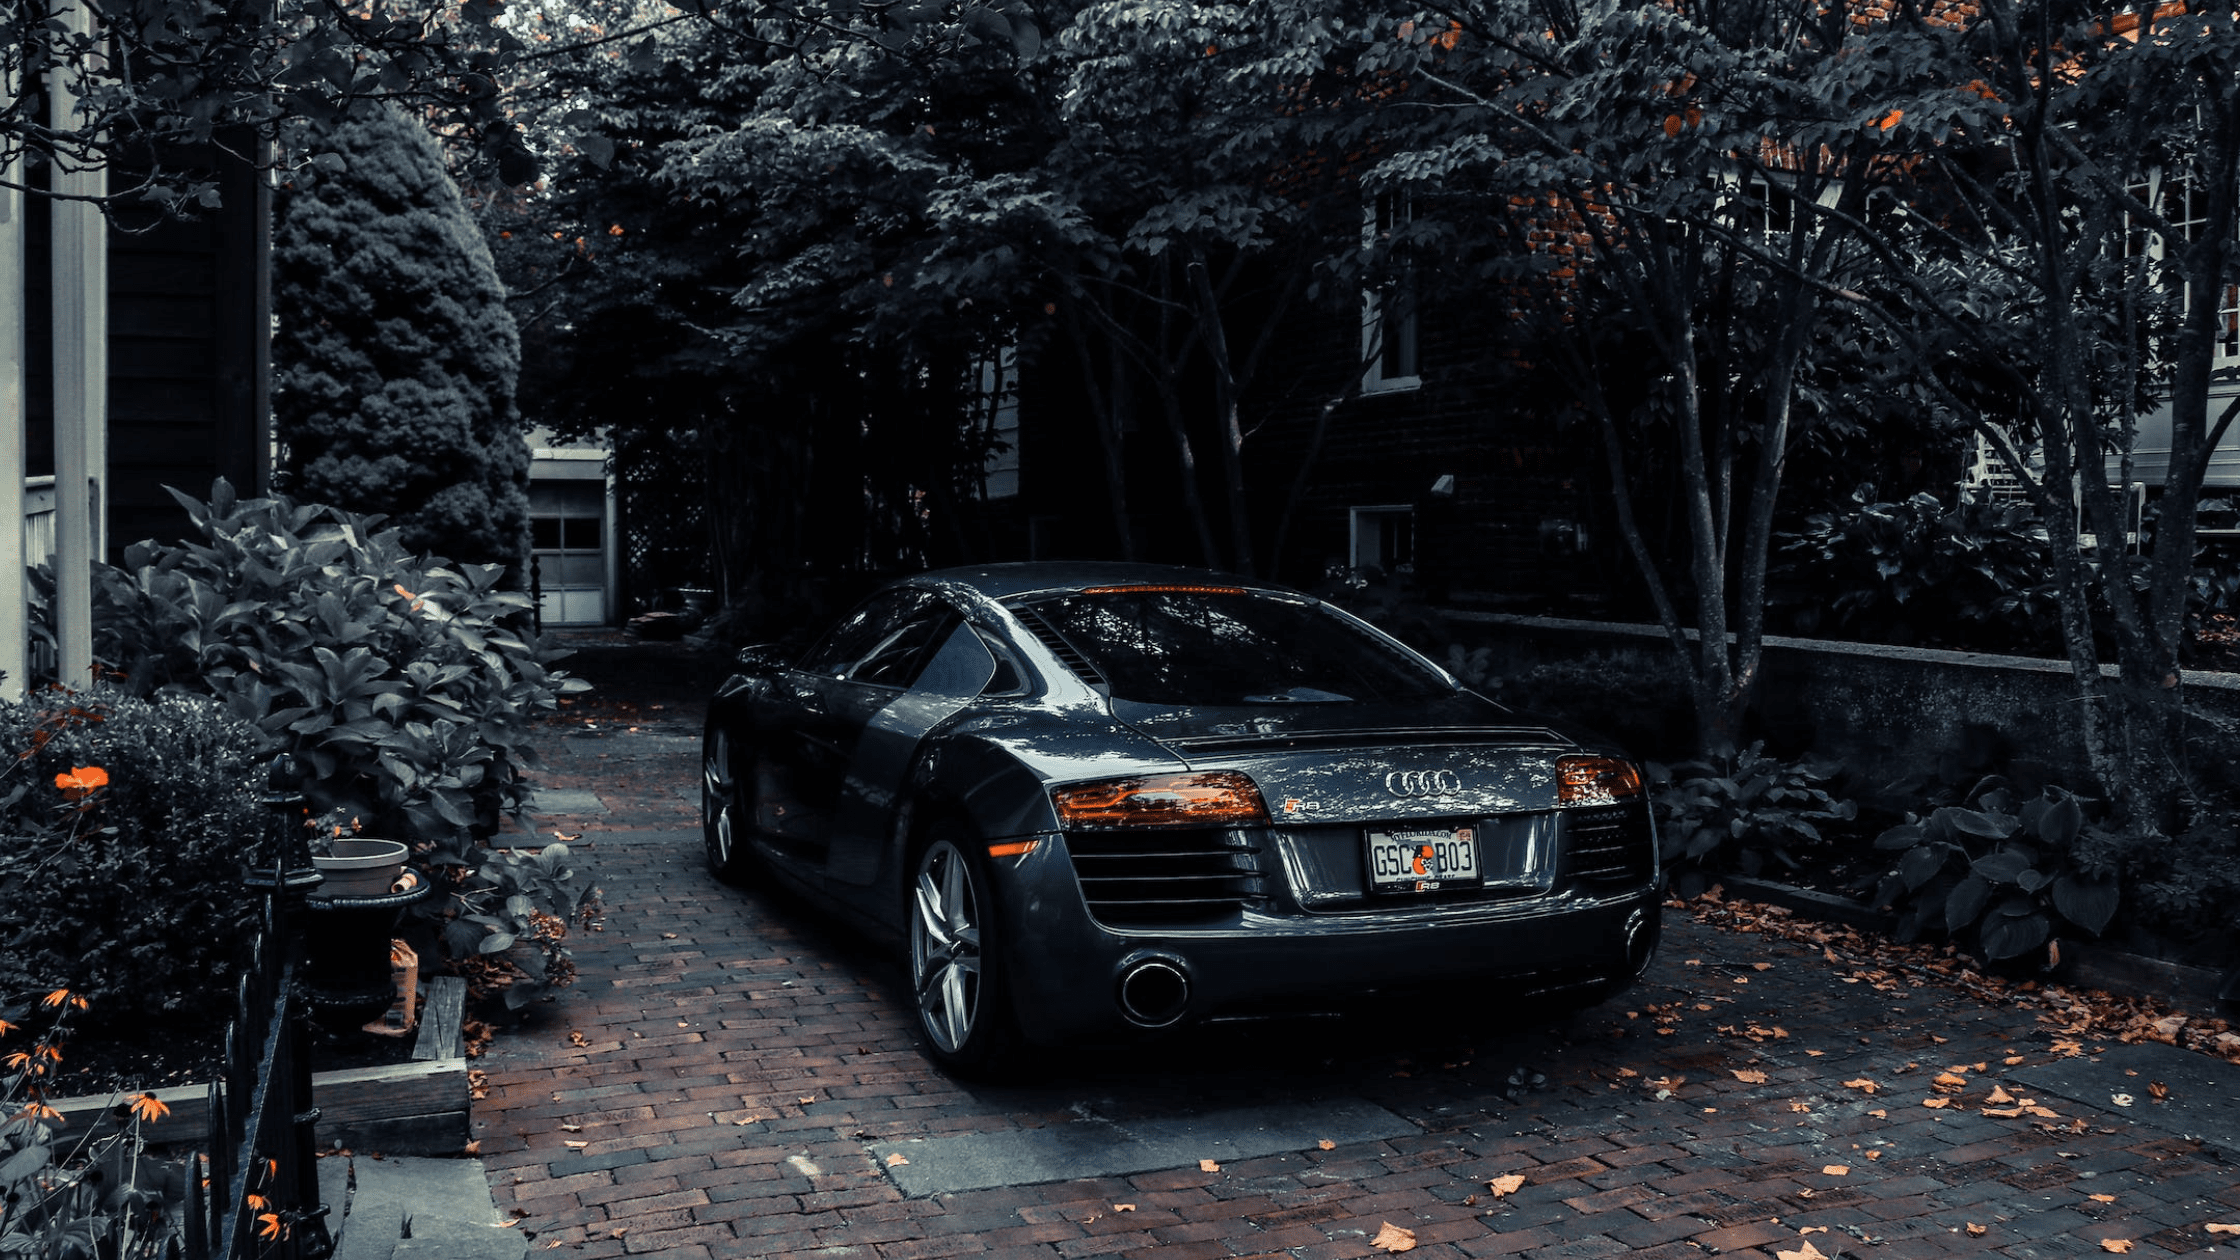 Looking for a high-performance sports car in Sydney? Look no further than the Audi R8. With its powerful engine, stunning design, and state-of-the-art features, the R8 is the epitome of luxury and speed. Whether you're cruising the streets or tearing up the track, the Audi R8 is sure to impress.